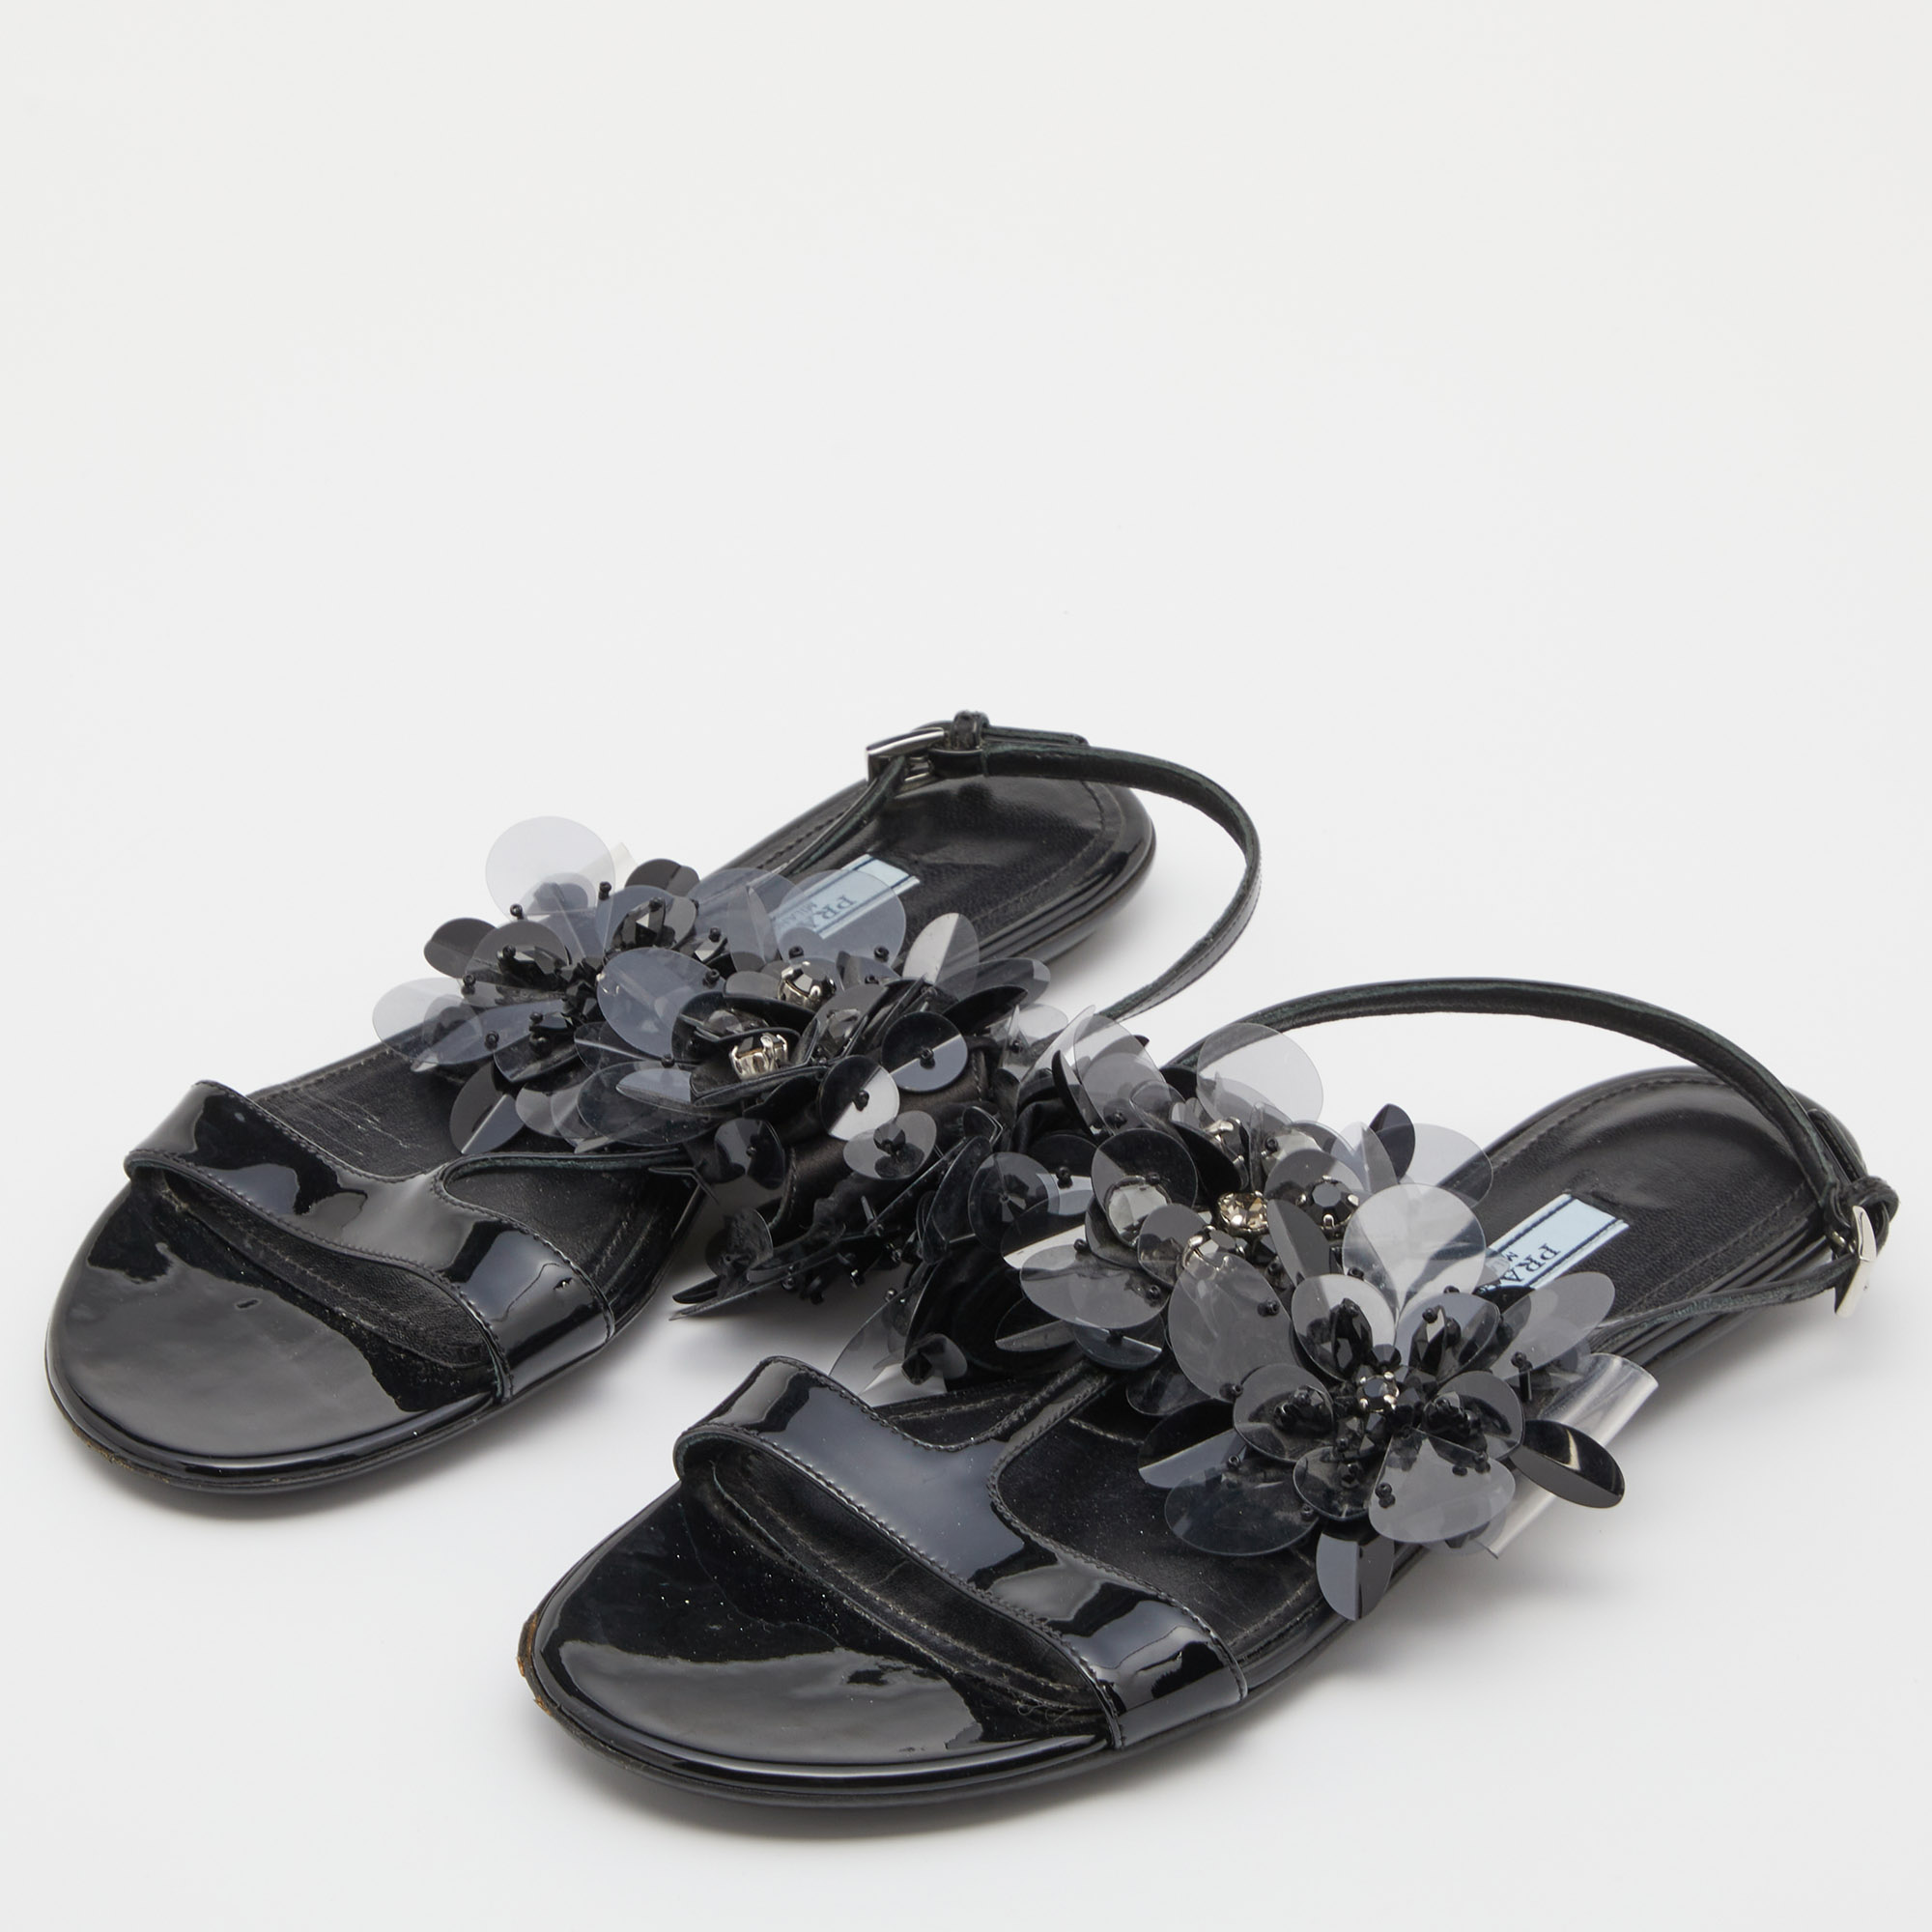 

Prada Black Patent Leather and PVC Crystal/Beads Embellished Flat Sandals Size